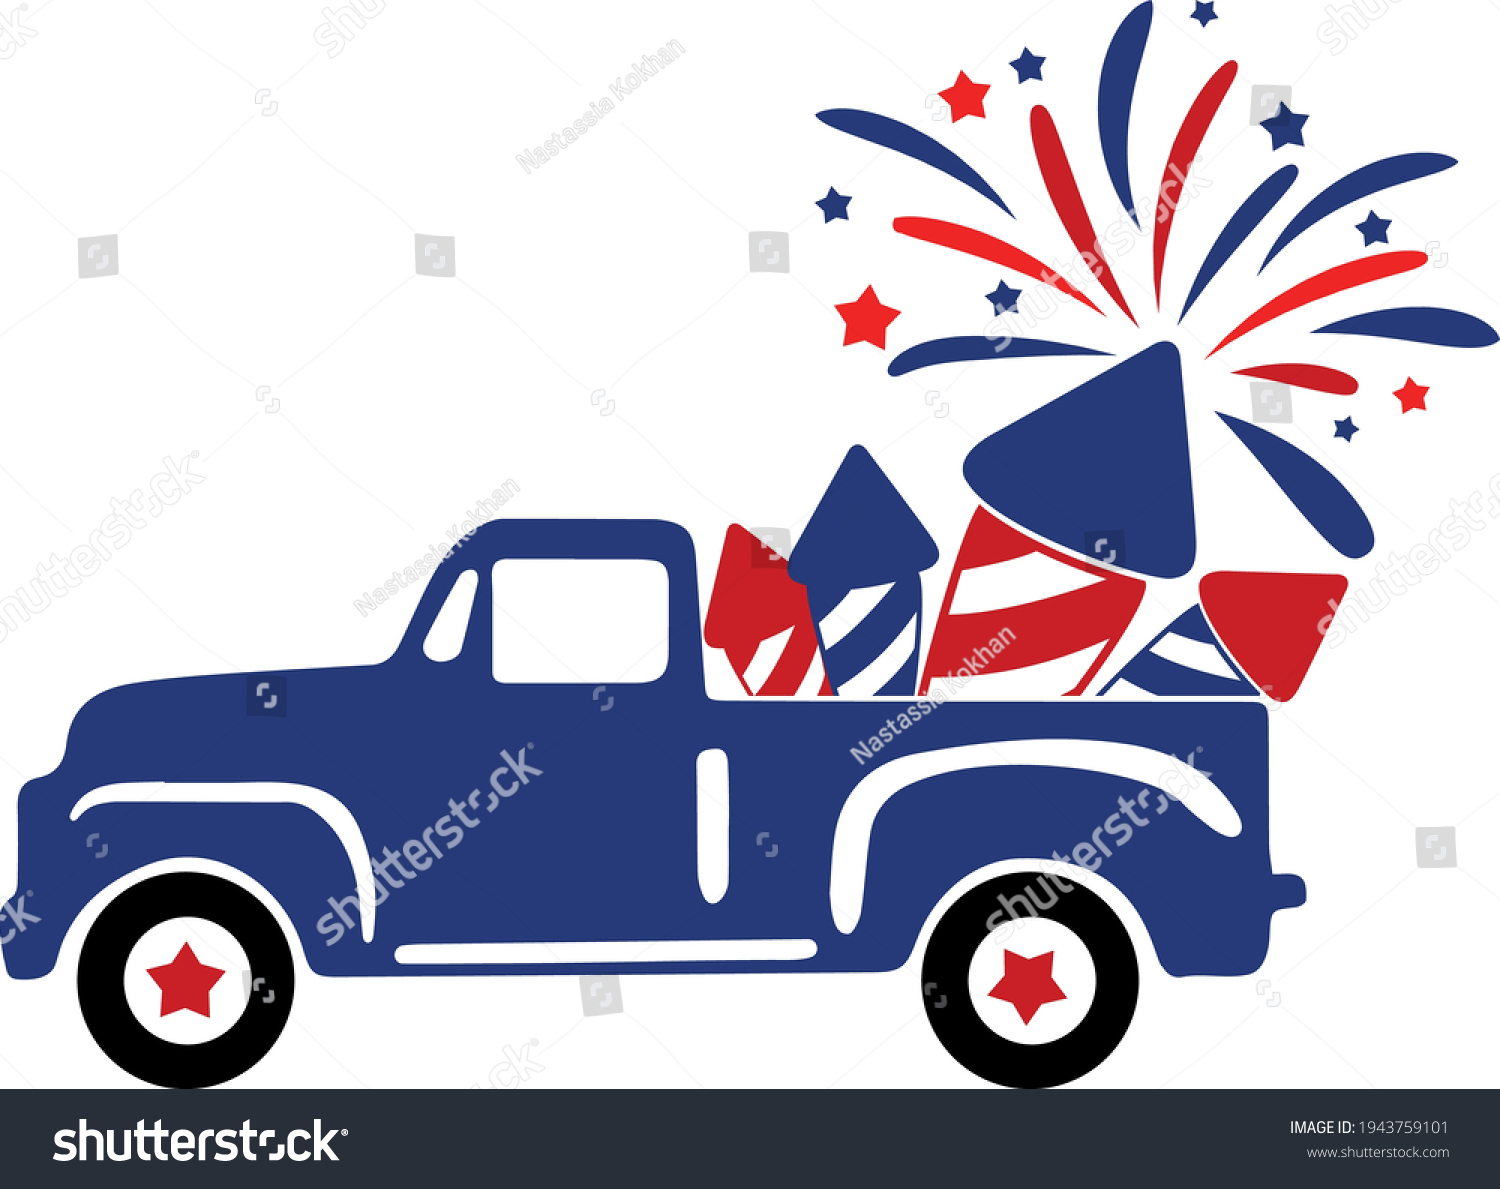 SVG of 4th of July Svg vector Illustration isolated on white background. Independence day party decor. 4th of July truck with stars and stripes. Vintage truck Independence day for scrapbooking, card, shirt. svg